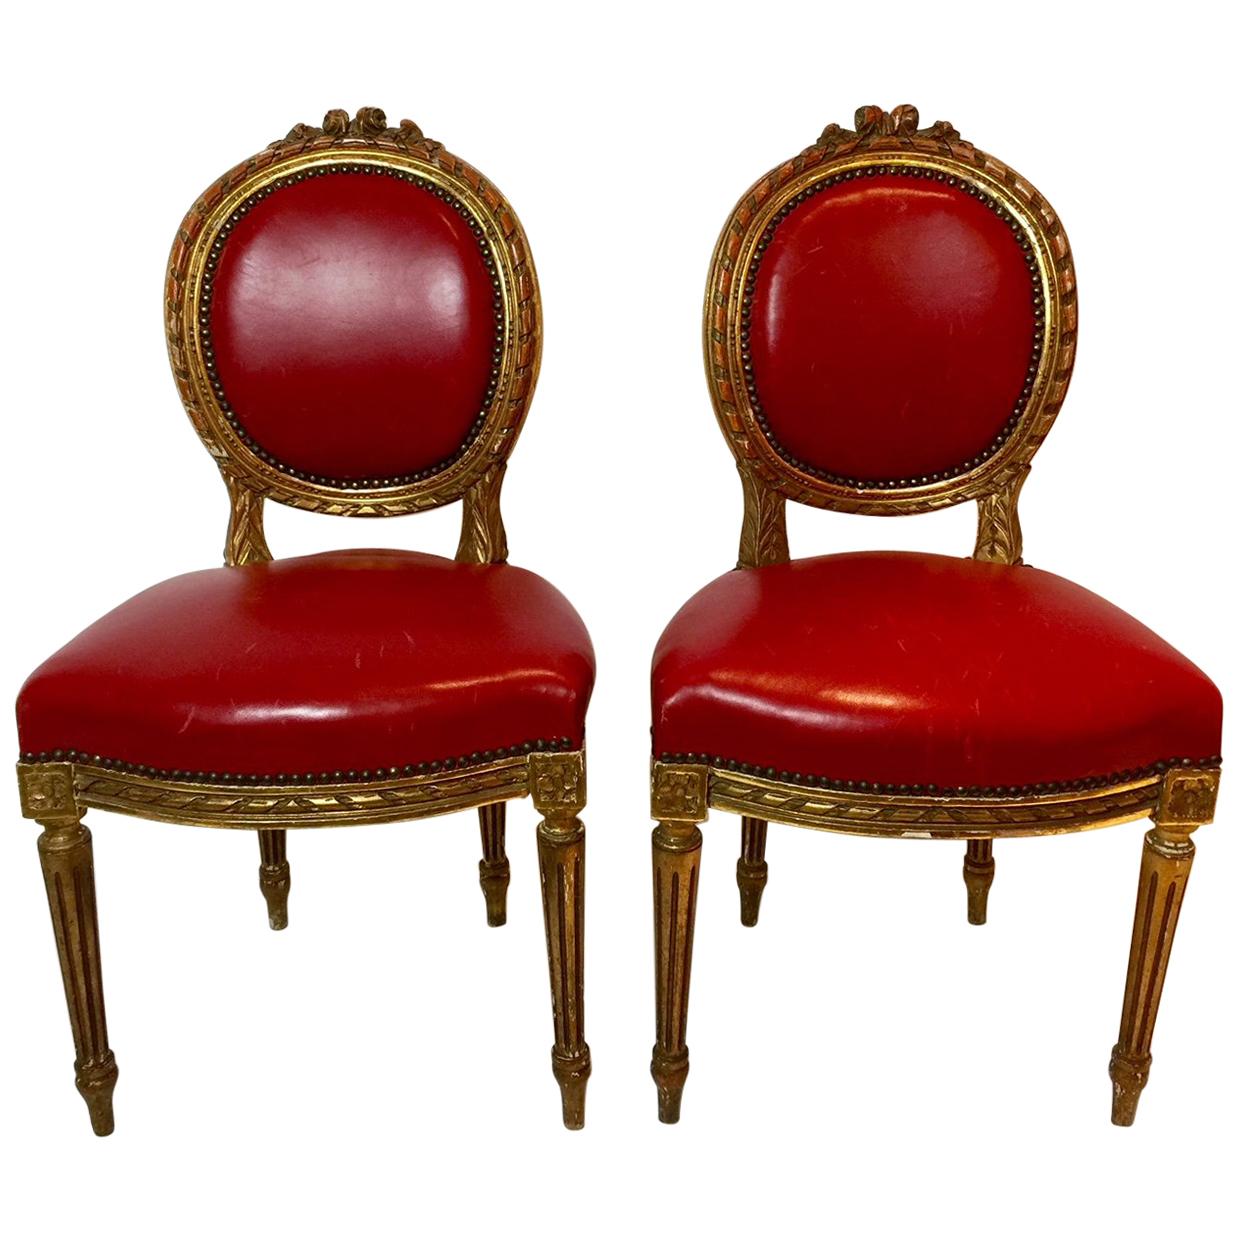 Pair of Red Louis XVI Style Giltwood Chairs